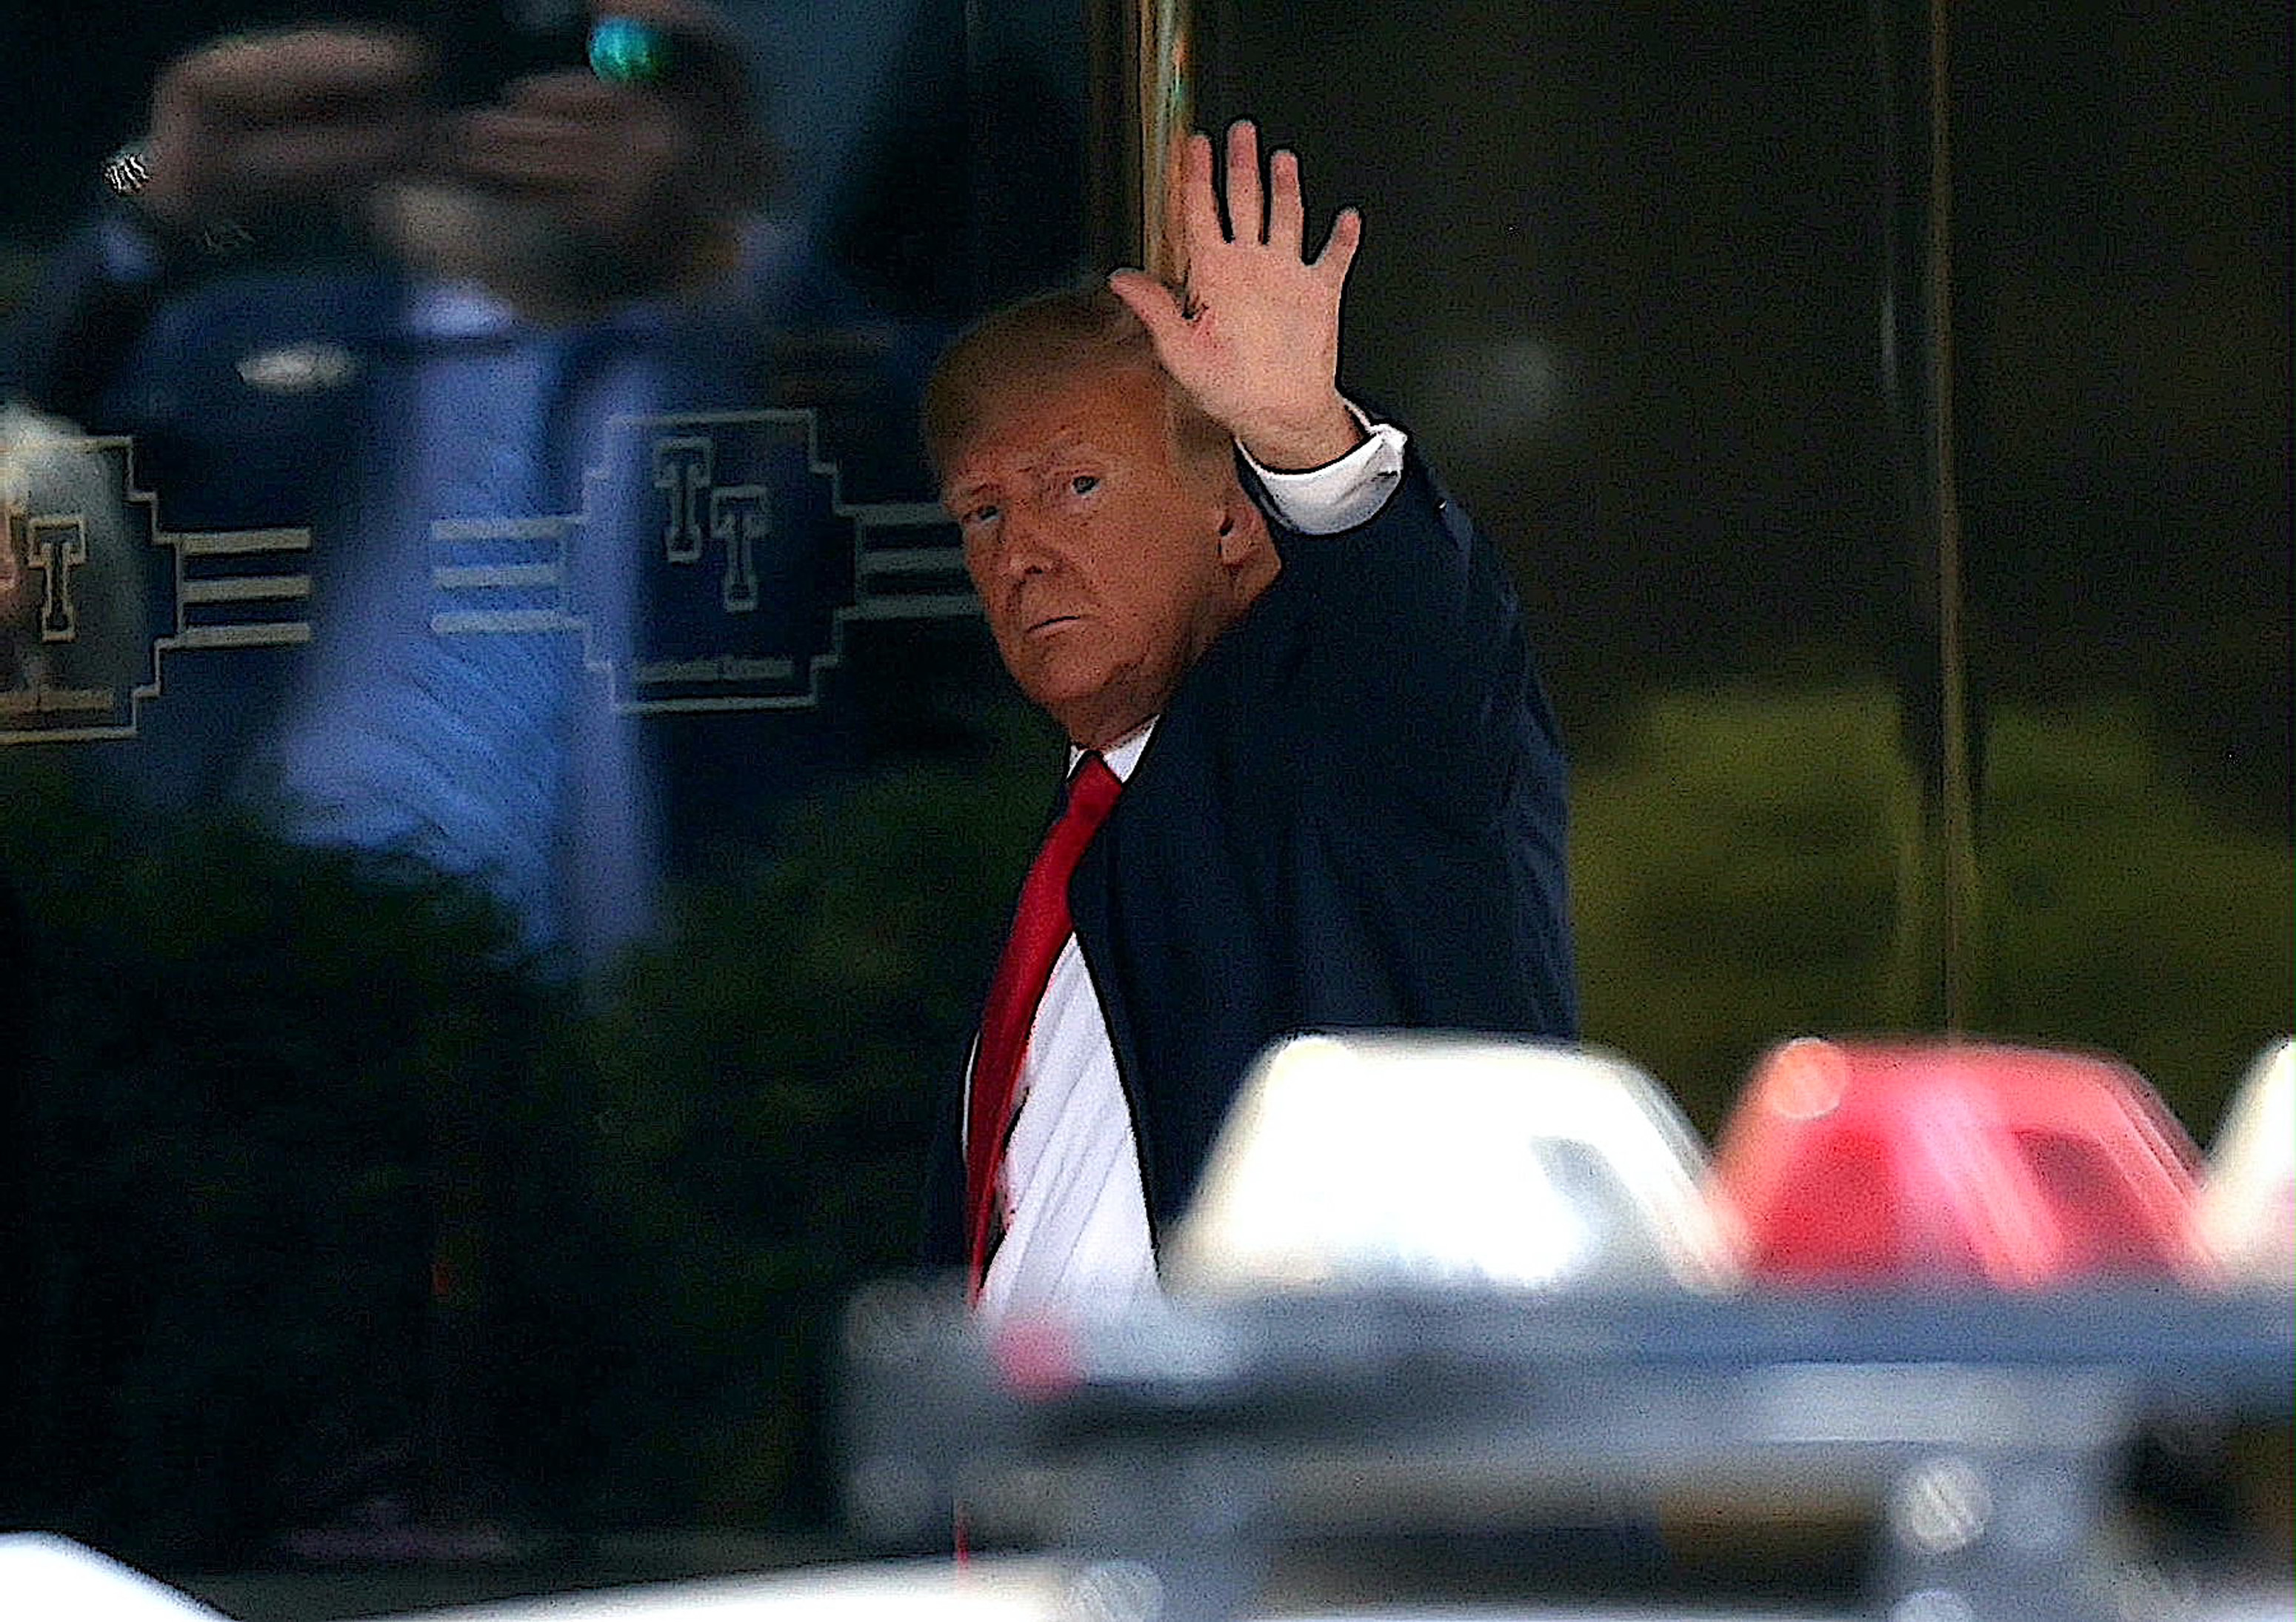 Former President Donald Trump is seen on April 3, 2023 in New York City. Trump is scheduled to be arraigned the next day at a Manhattan courthouse following his indictment by a grand jury. (Jose Perez/Bauer-Griffin/GC Images)